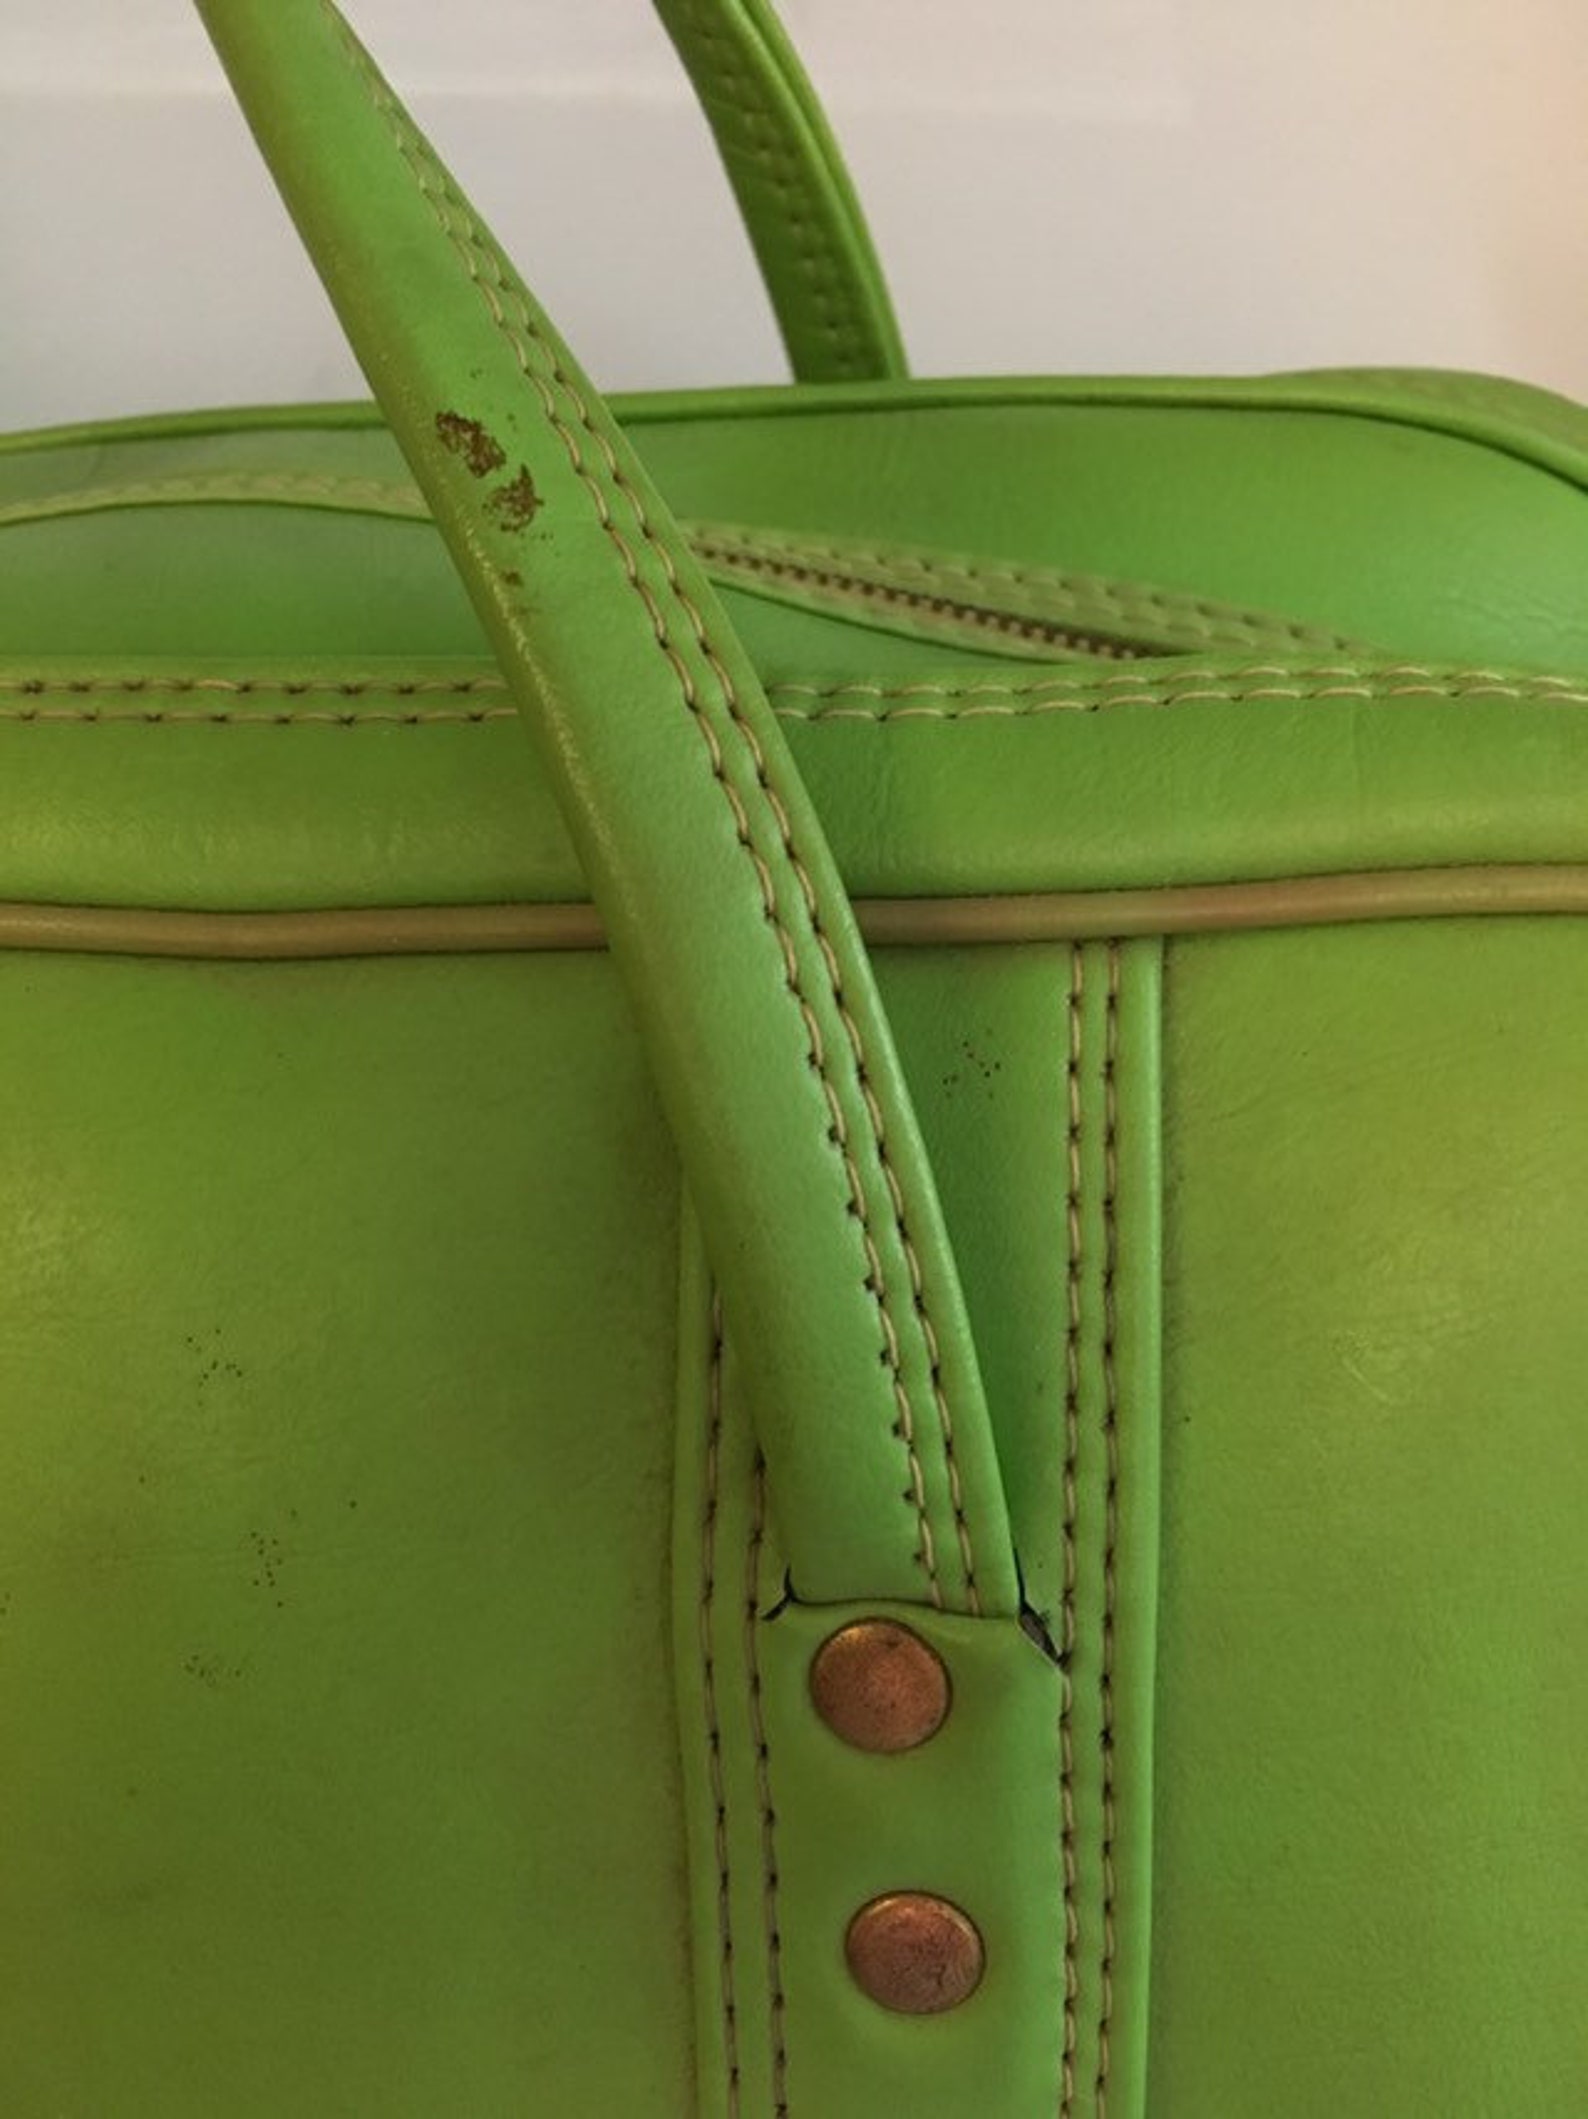 Vintage Carry on Luggage Soft Side Lime Green Travel Bagmod - Etsy